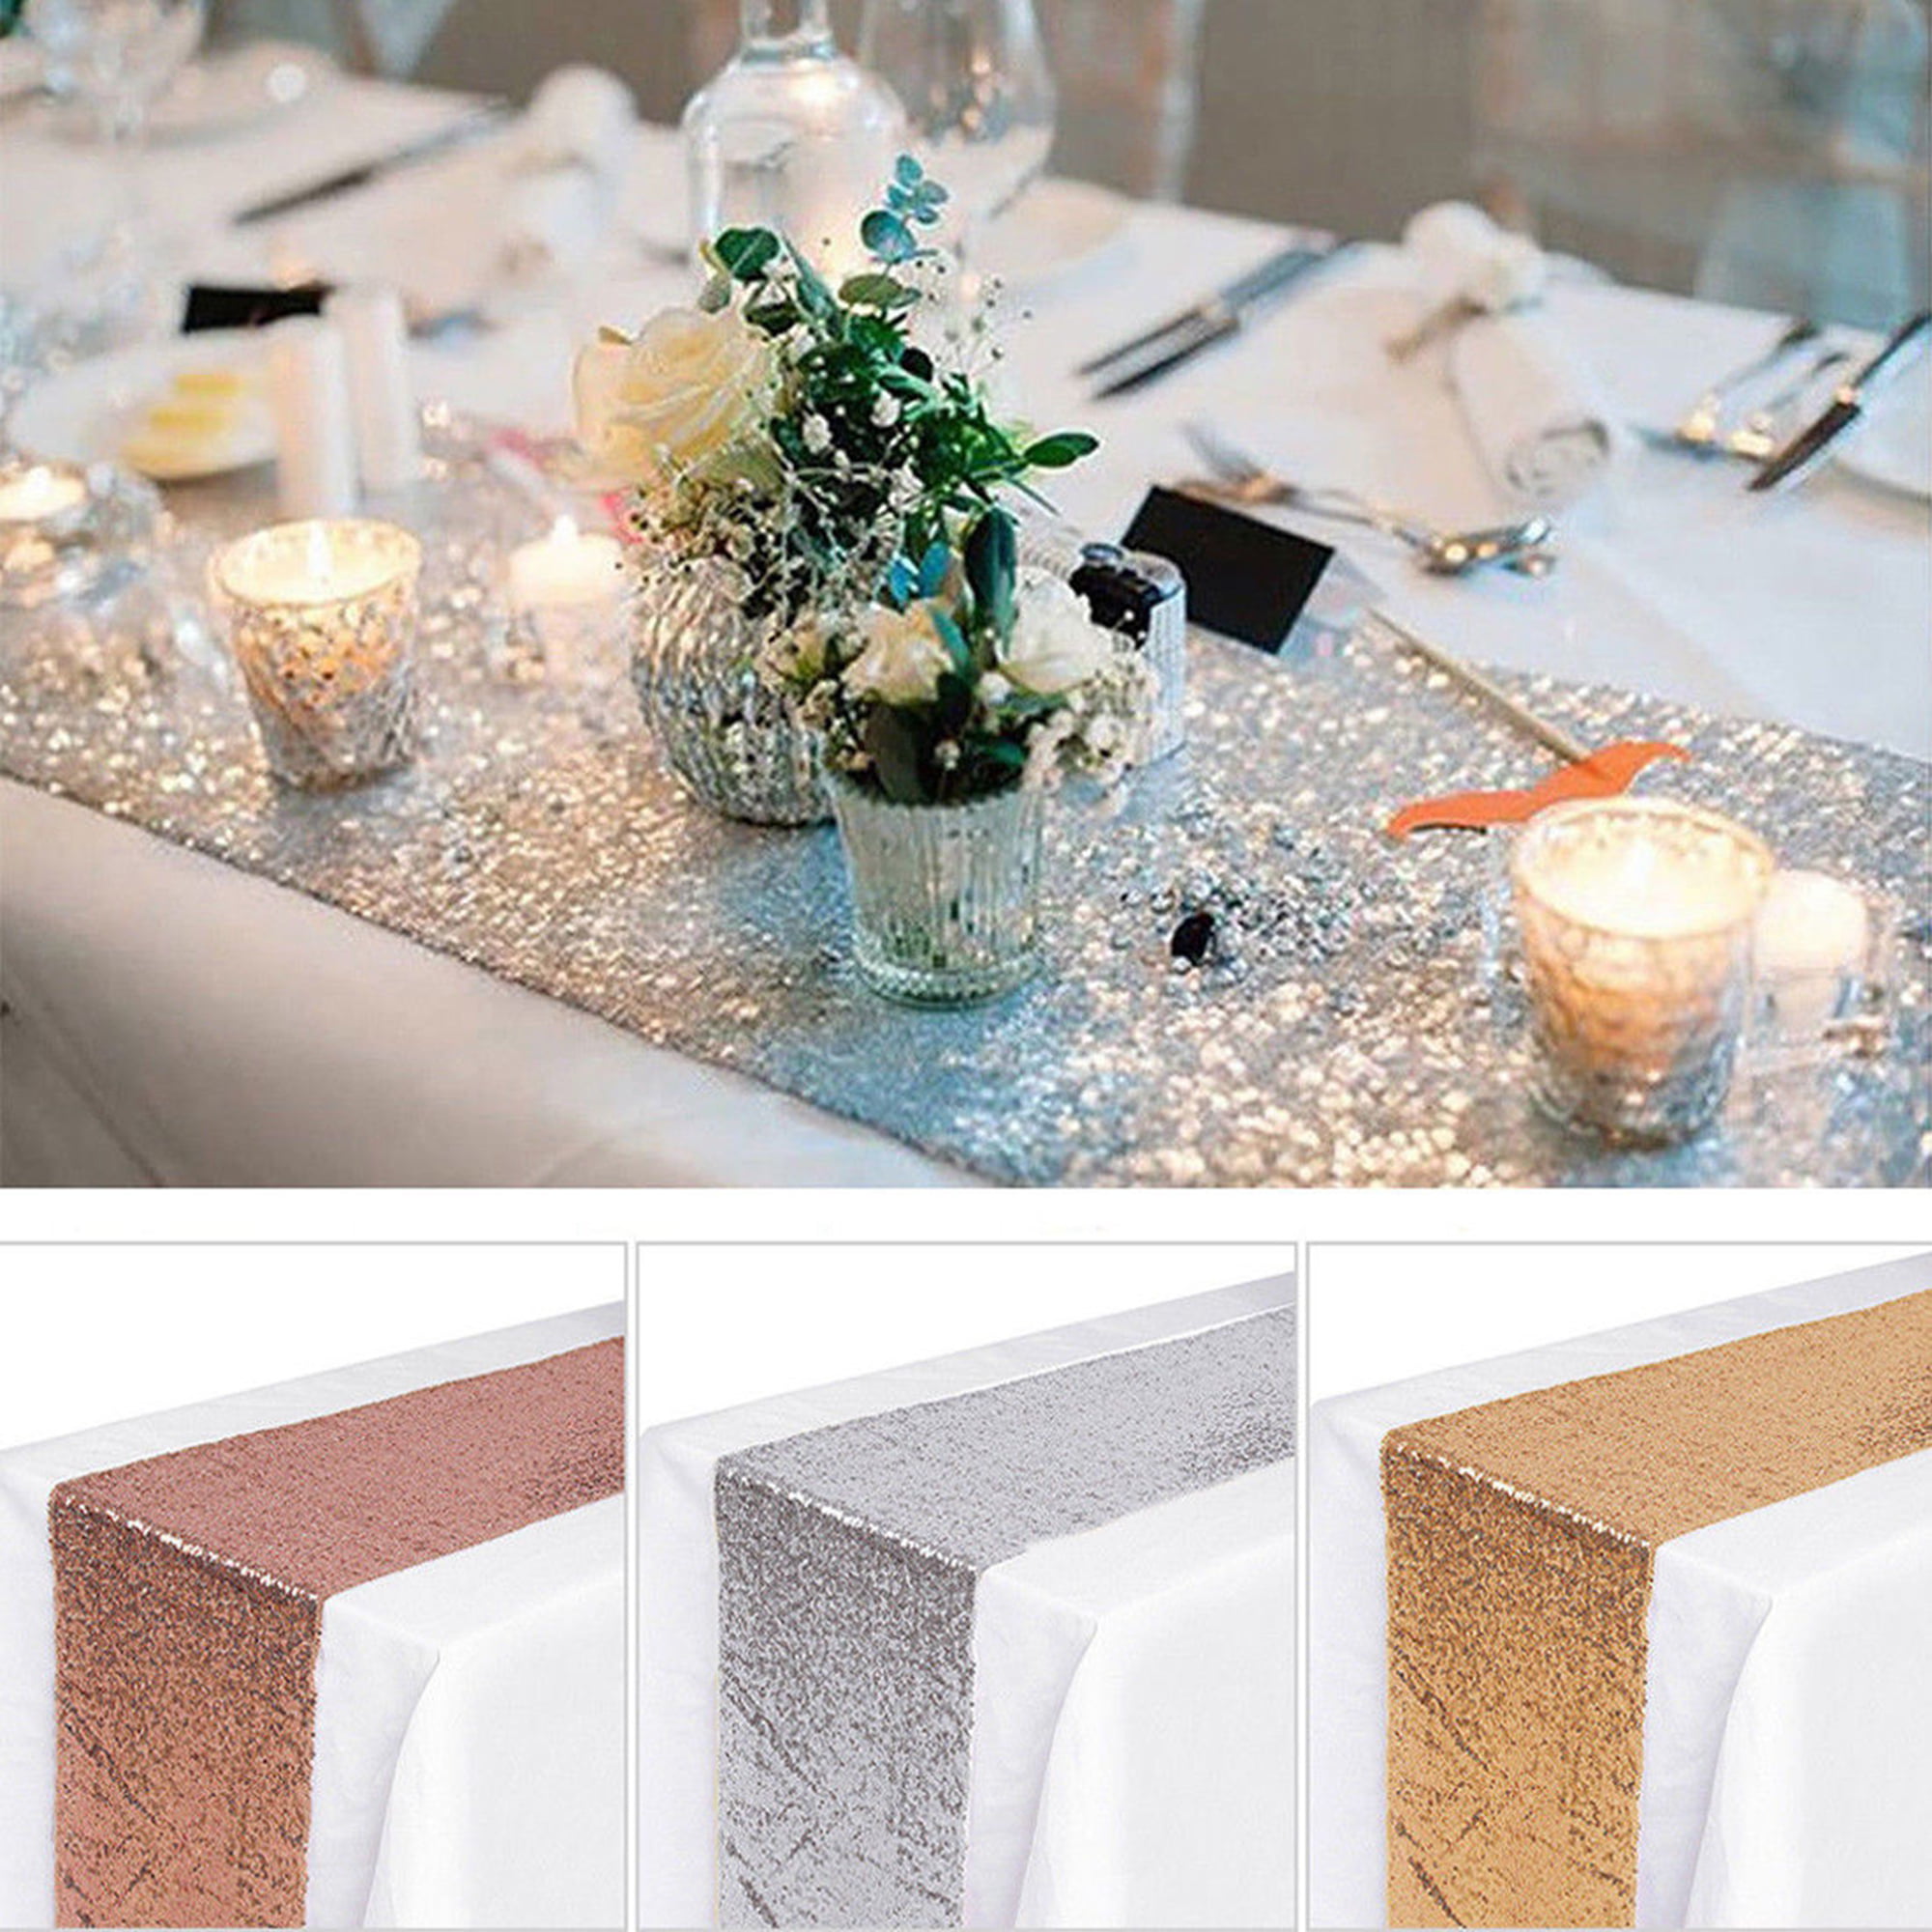 Glitter Table Runner Cloth Wedding Home Decor Sequin Gold Silver Champagne Color 